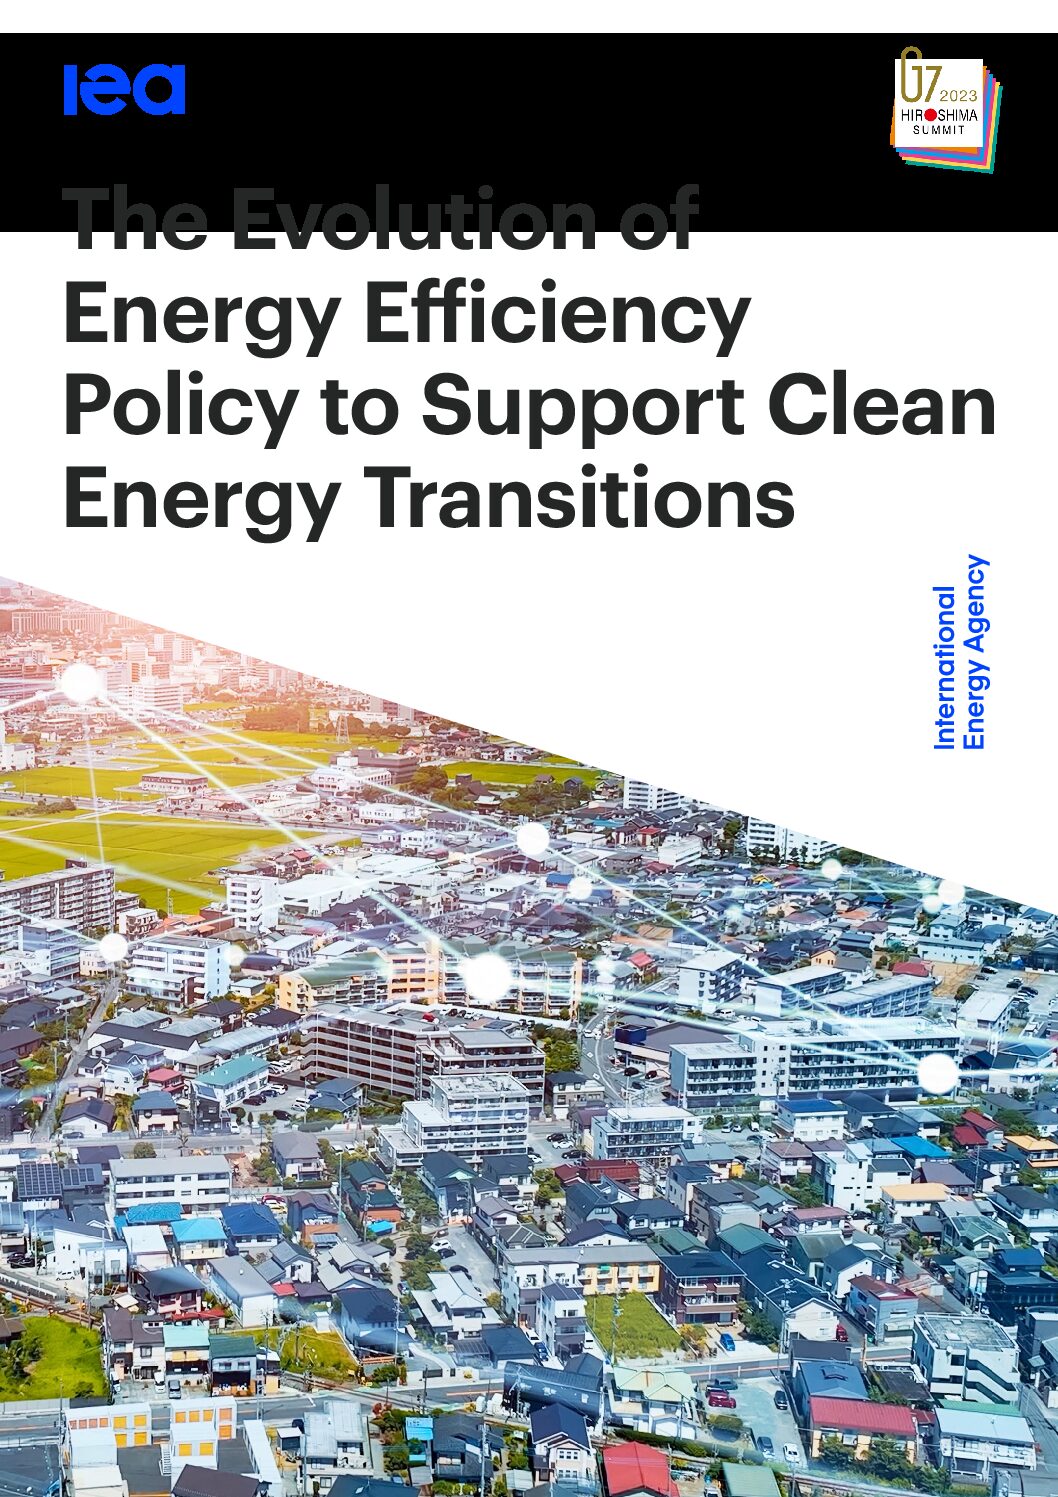 https://img.saurenergy.com/2024/01/profile-the-evolution-of-energy-efficiency-policy-to-support-clean-energy-transitions-pdf.jpg